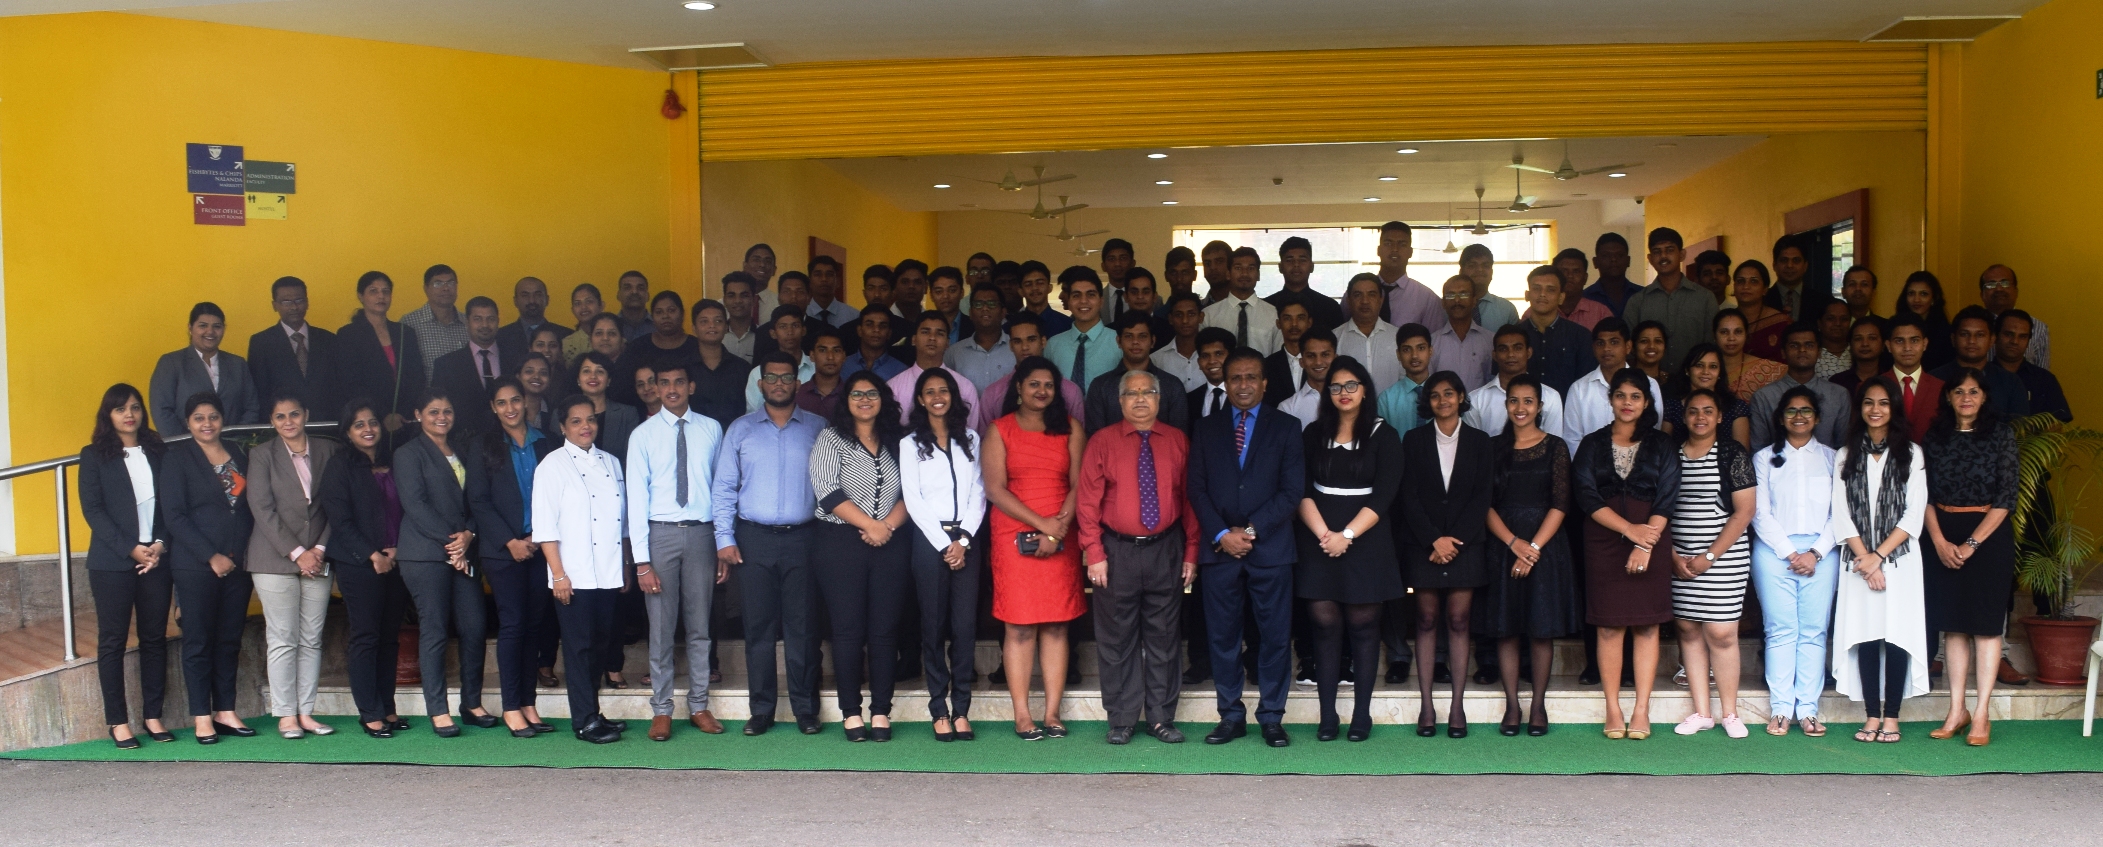 Picture 2 -Prof. Mirza, Director, faculty and staff members of VMSIIHE along with the fourth batch of students inducted for the academic year 2017-18